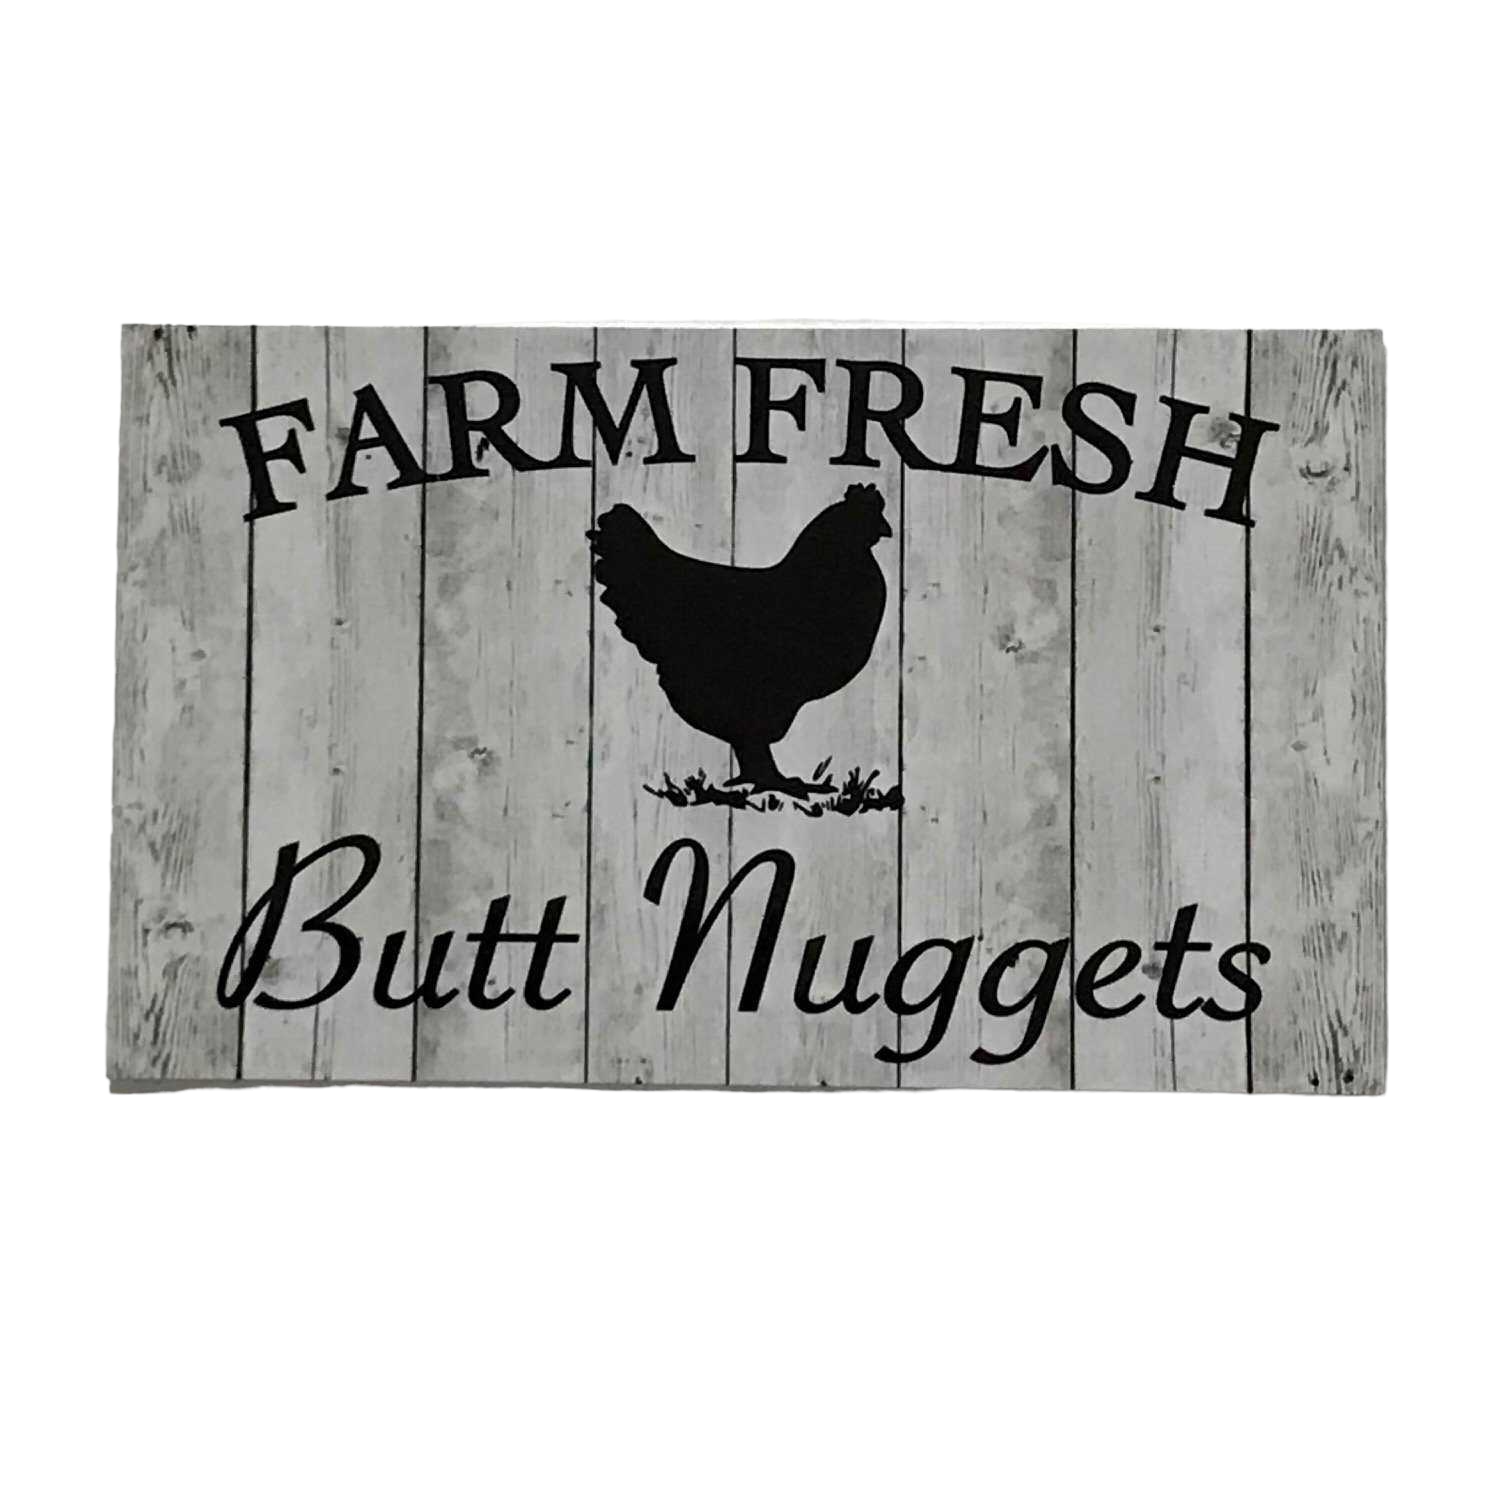 Farm Fresh Butt Nuggets Egg White Wash Sign - The Renmy Store Homewares & Gifts 